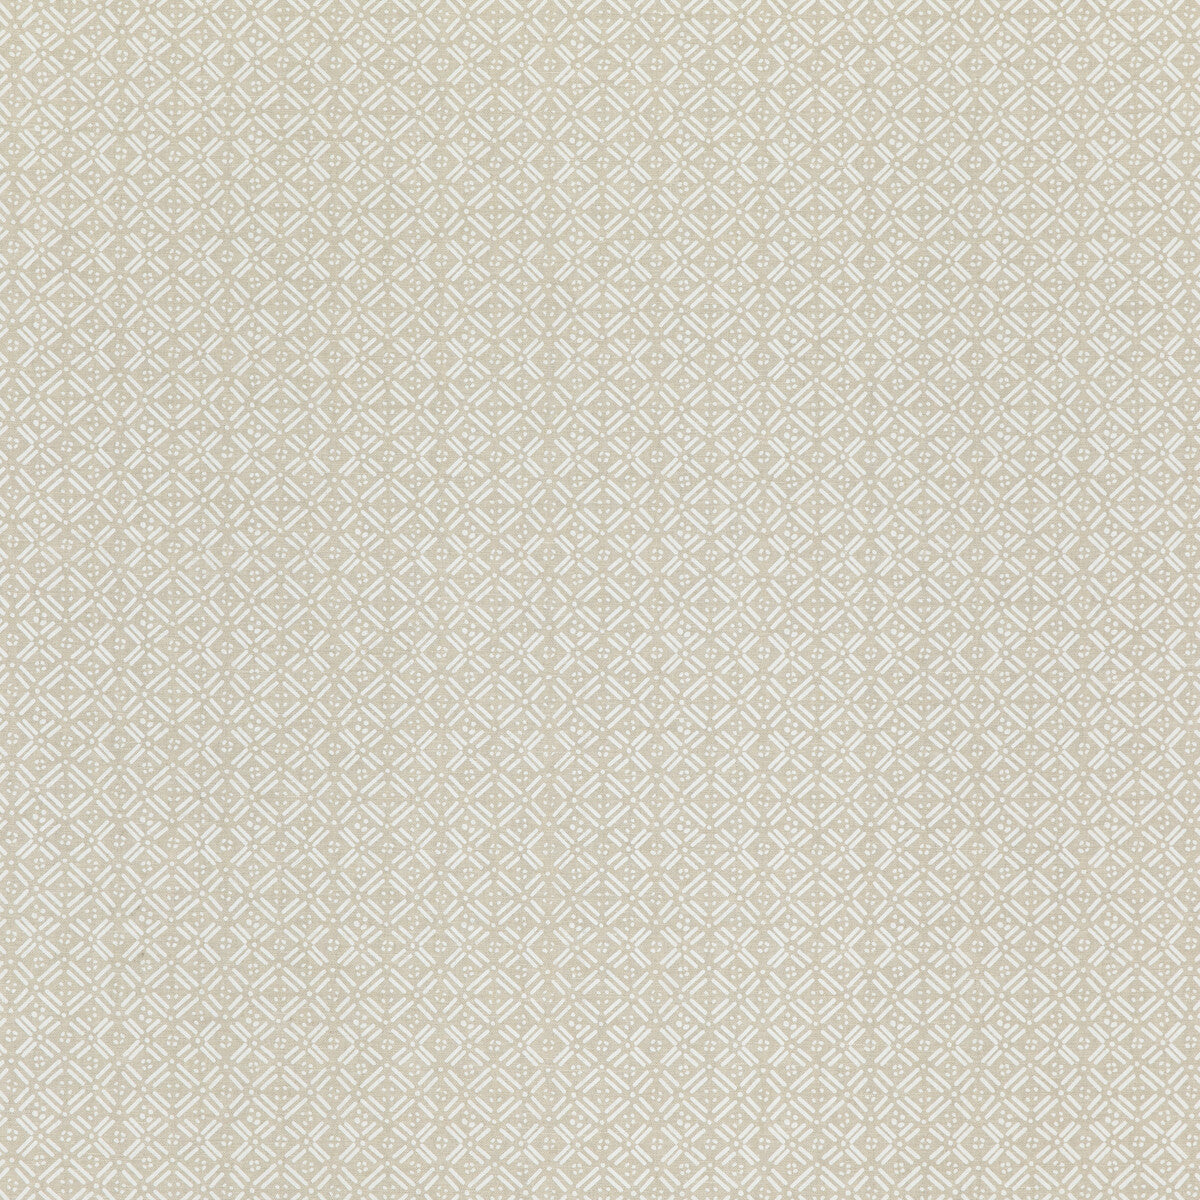 Aslin fabric in ivory color - pattern ED75036.1.0 - by Threads in the Moro collection